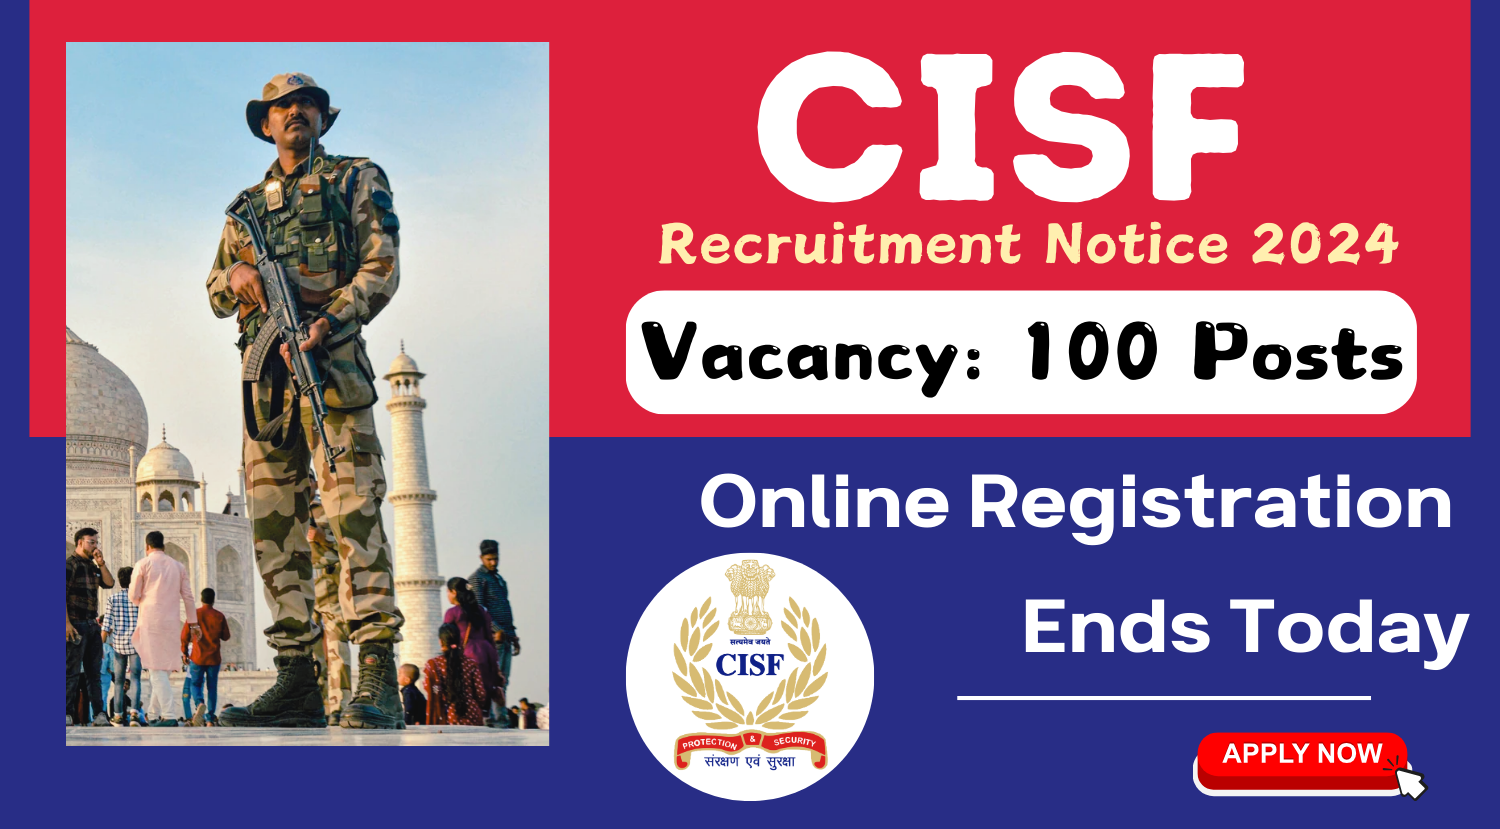 CISF-RECRUITMENT-2024-ONLINE-REGISTRATION-ENDS-TODAY